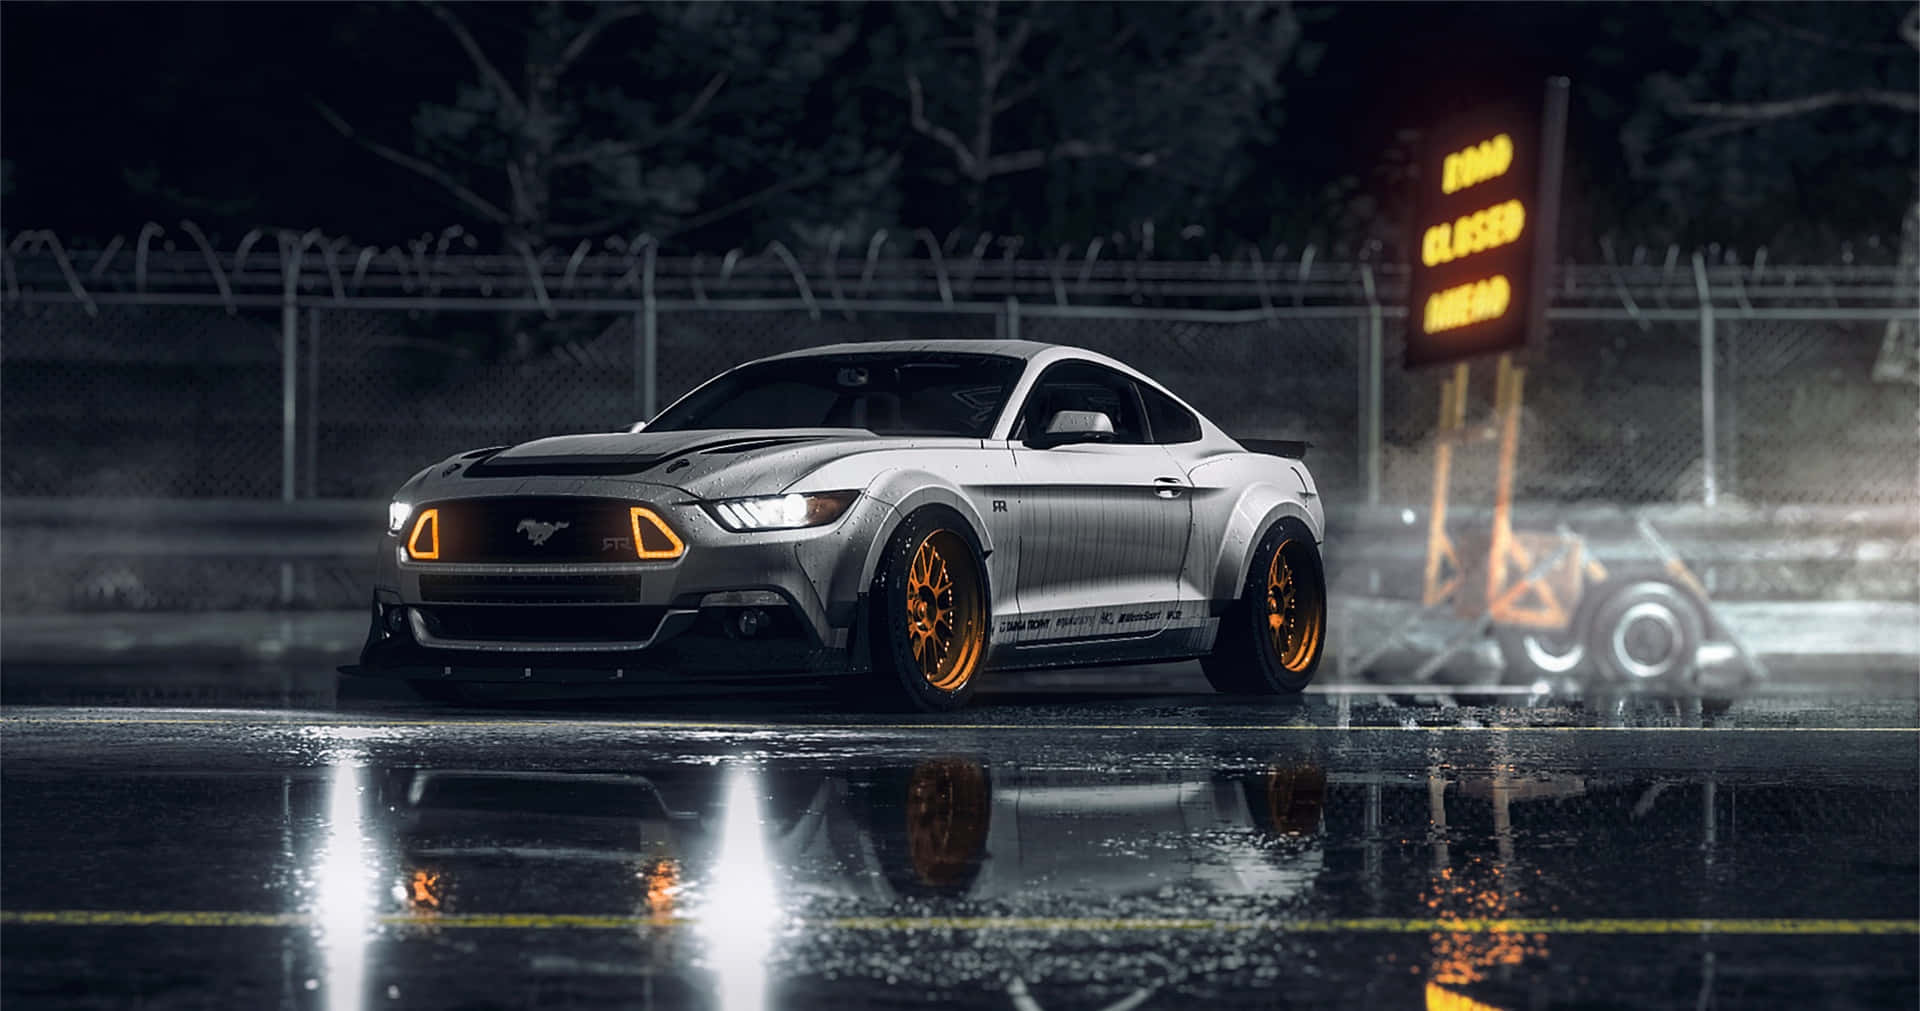 2015 Ford Mustang i behov for hastighed PC tapet Wallpaper